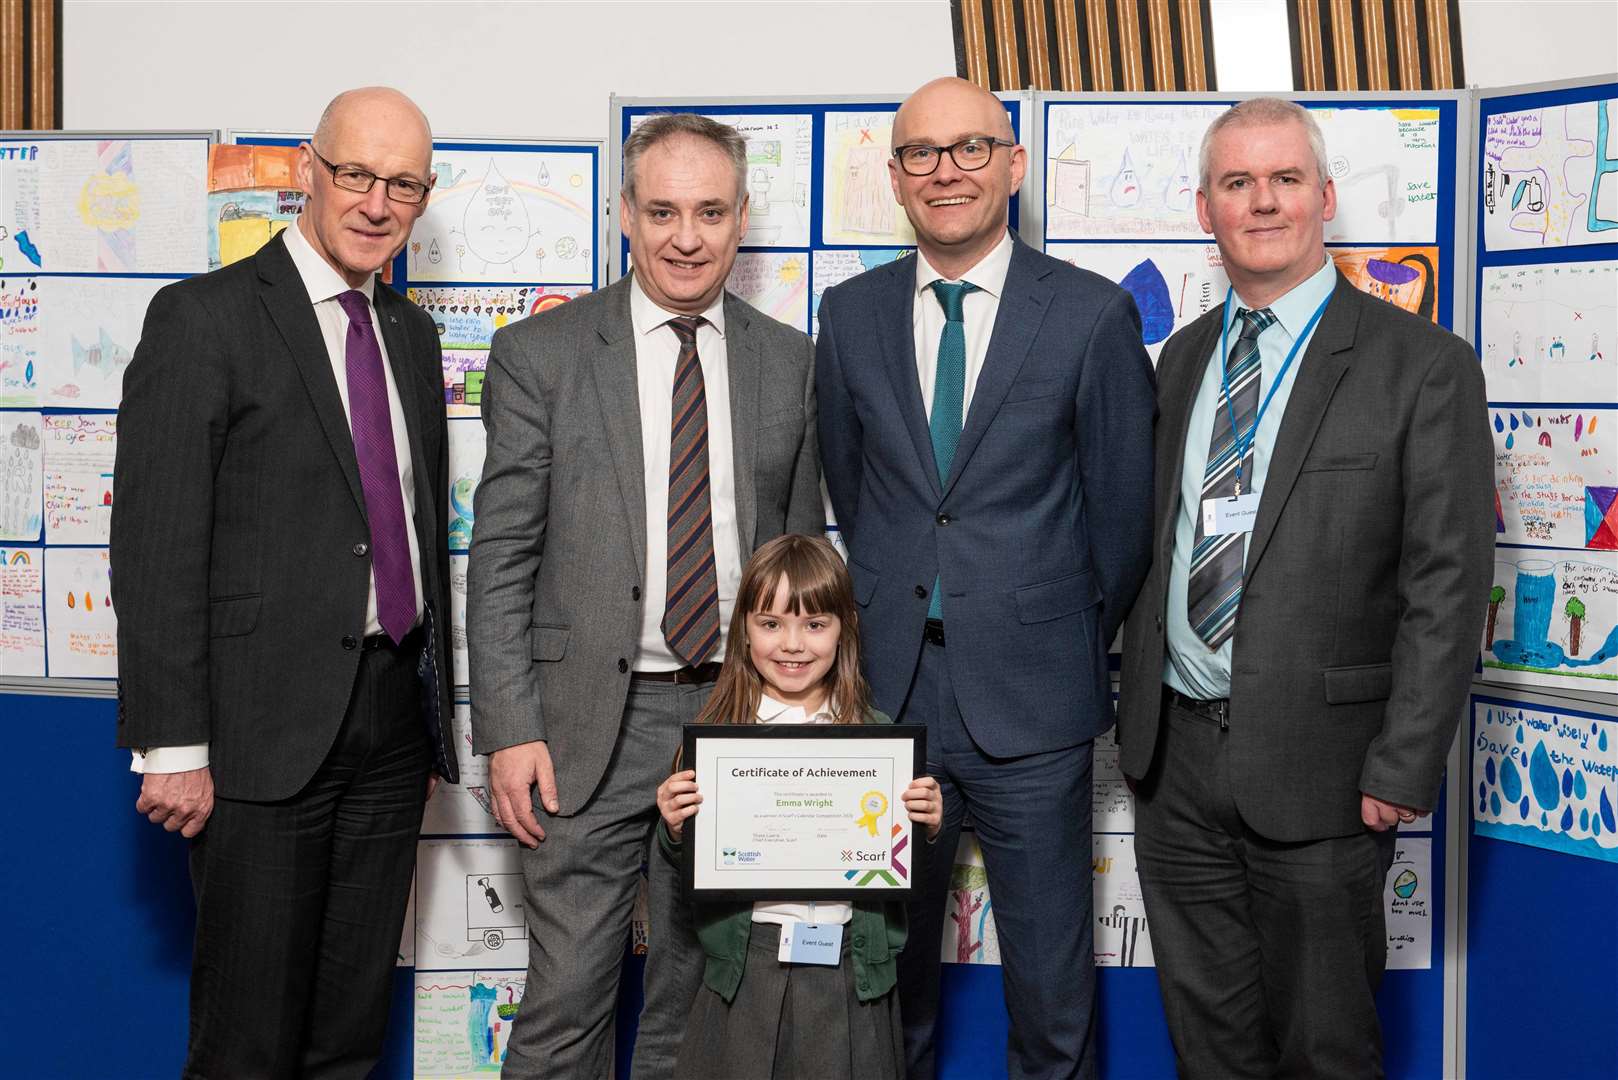 Emma Wright is pictured with (from left) Deputy First Minister John Swinney, Moray MSP Richard Lochhead, Brian Lironi of Scottish Water and Thane Lawrie of Scarf.